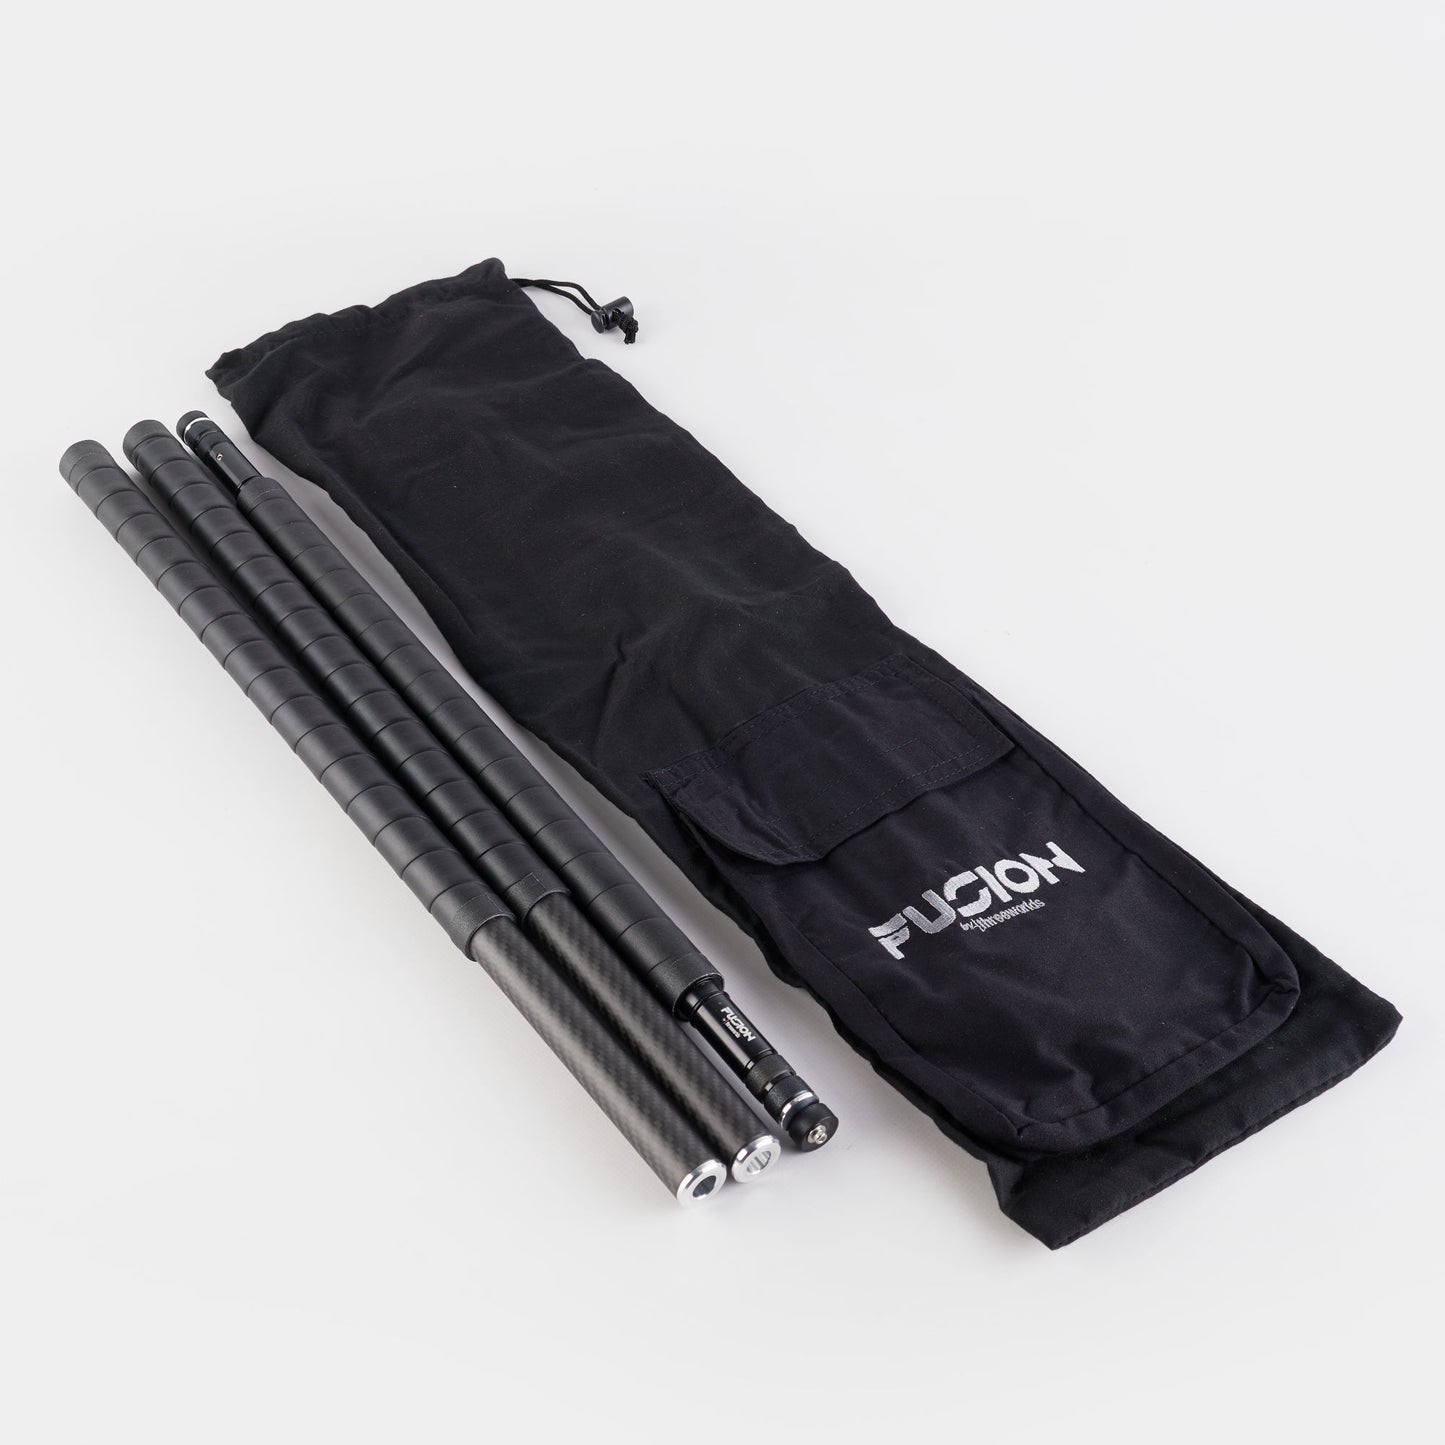 Threeworlds Collapsible Staff Bag